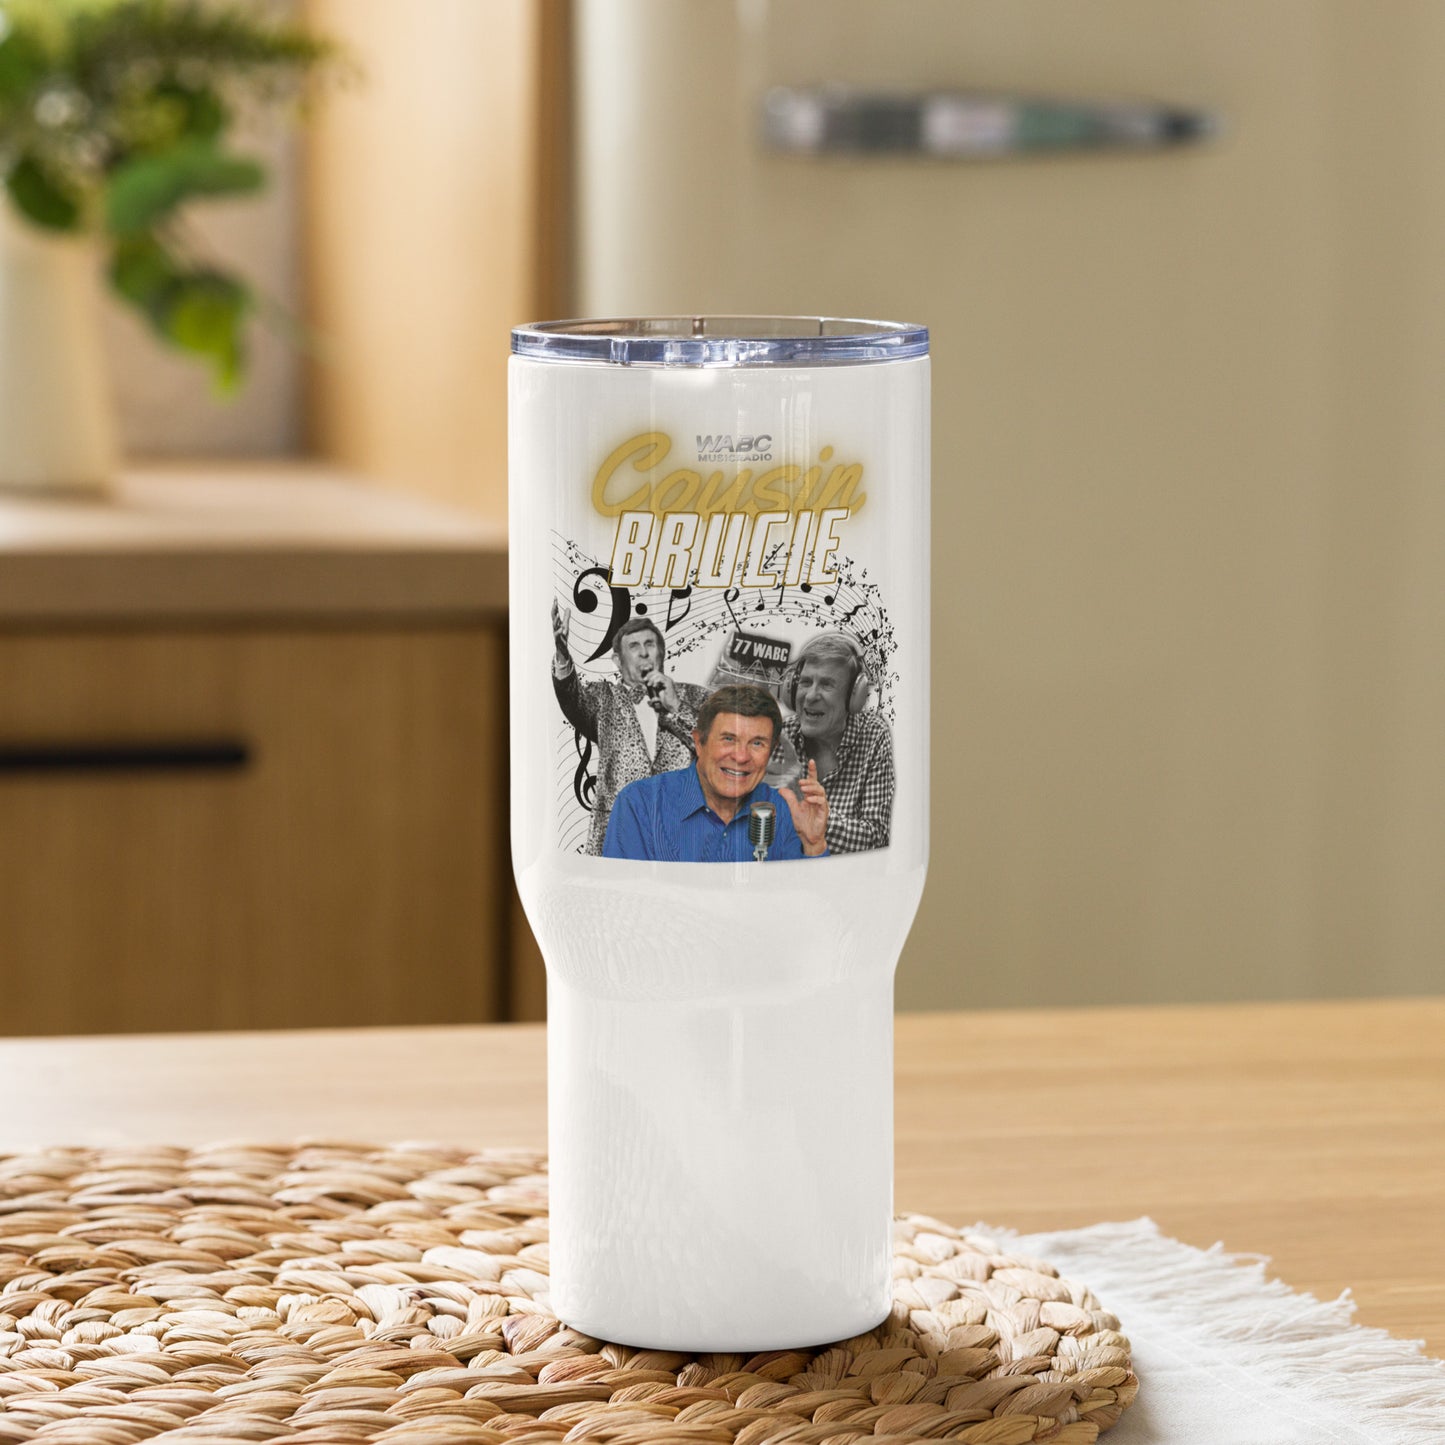 Cousin Brucie Travel mug with a handle